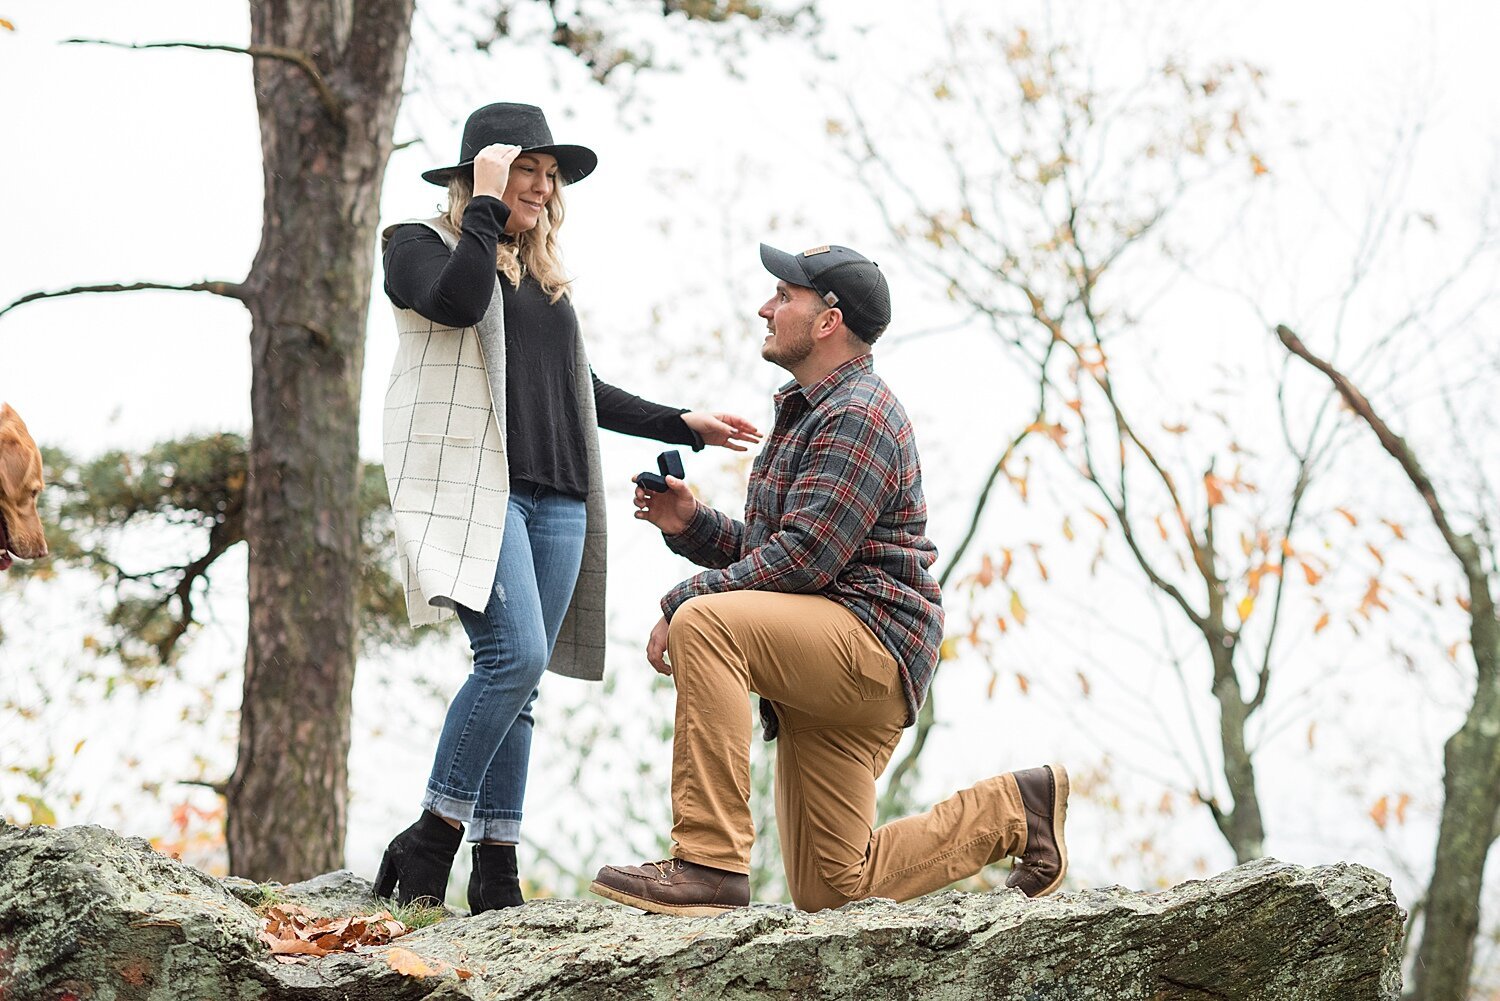 Pinnacle Overlook Holtwood PA Surprise Proposal Photography_8726.jpg